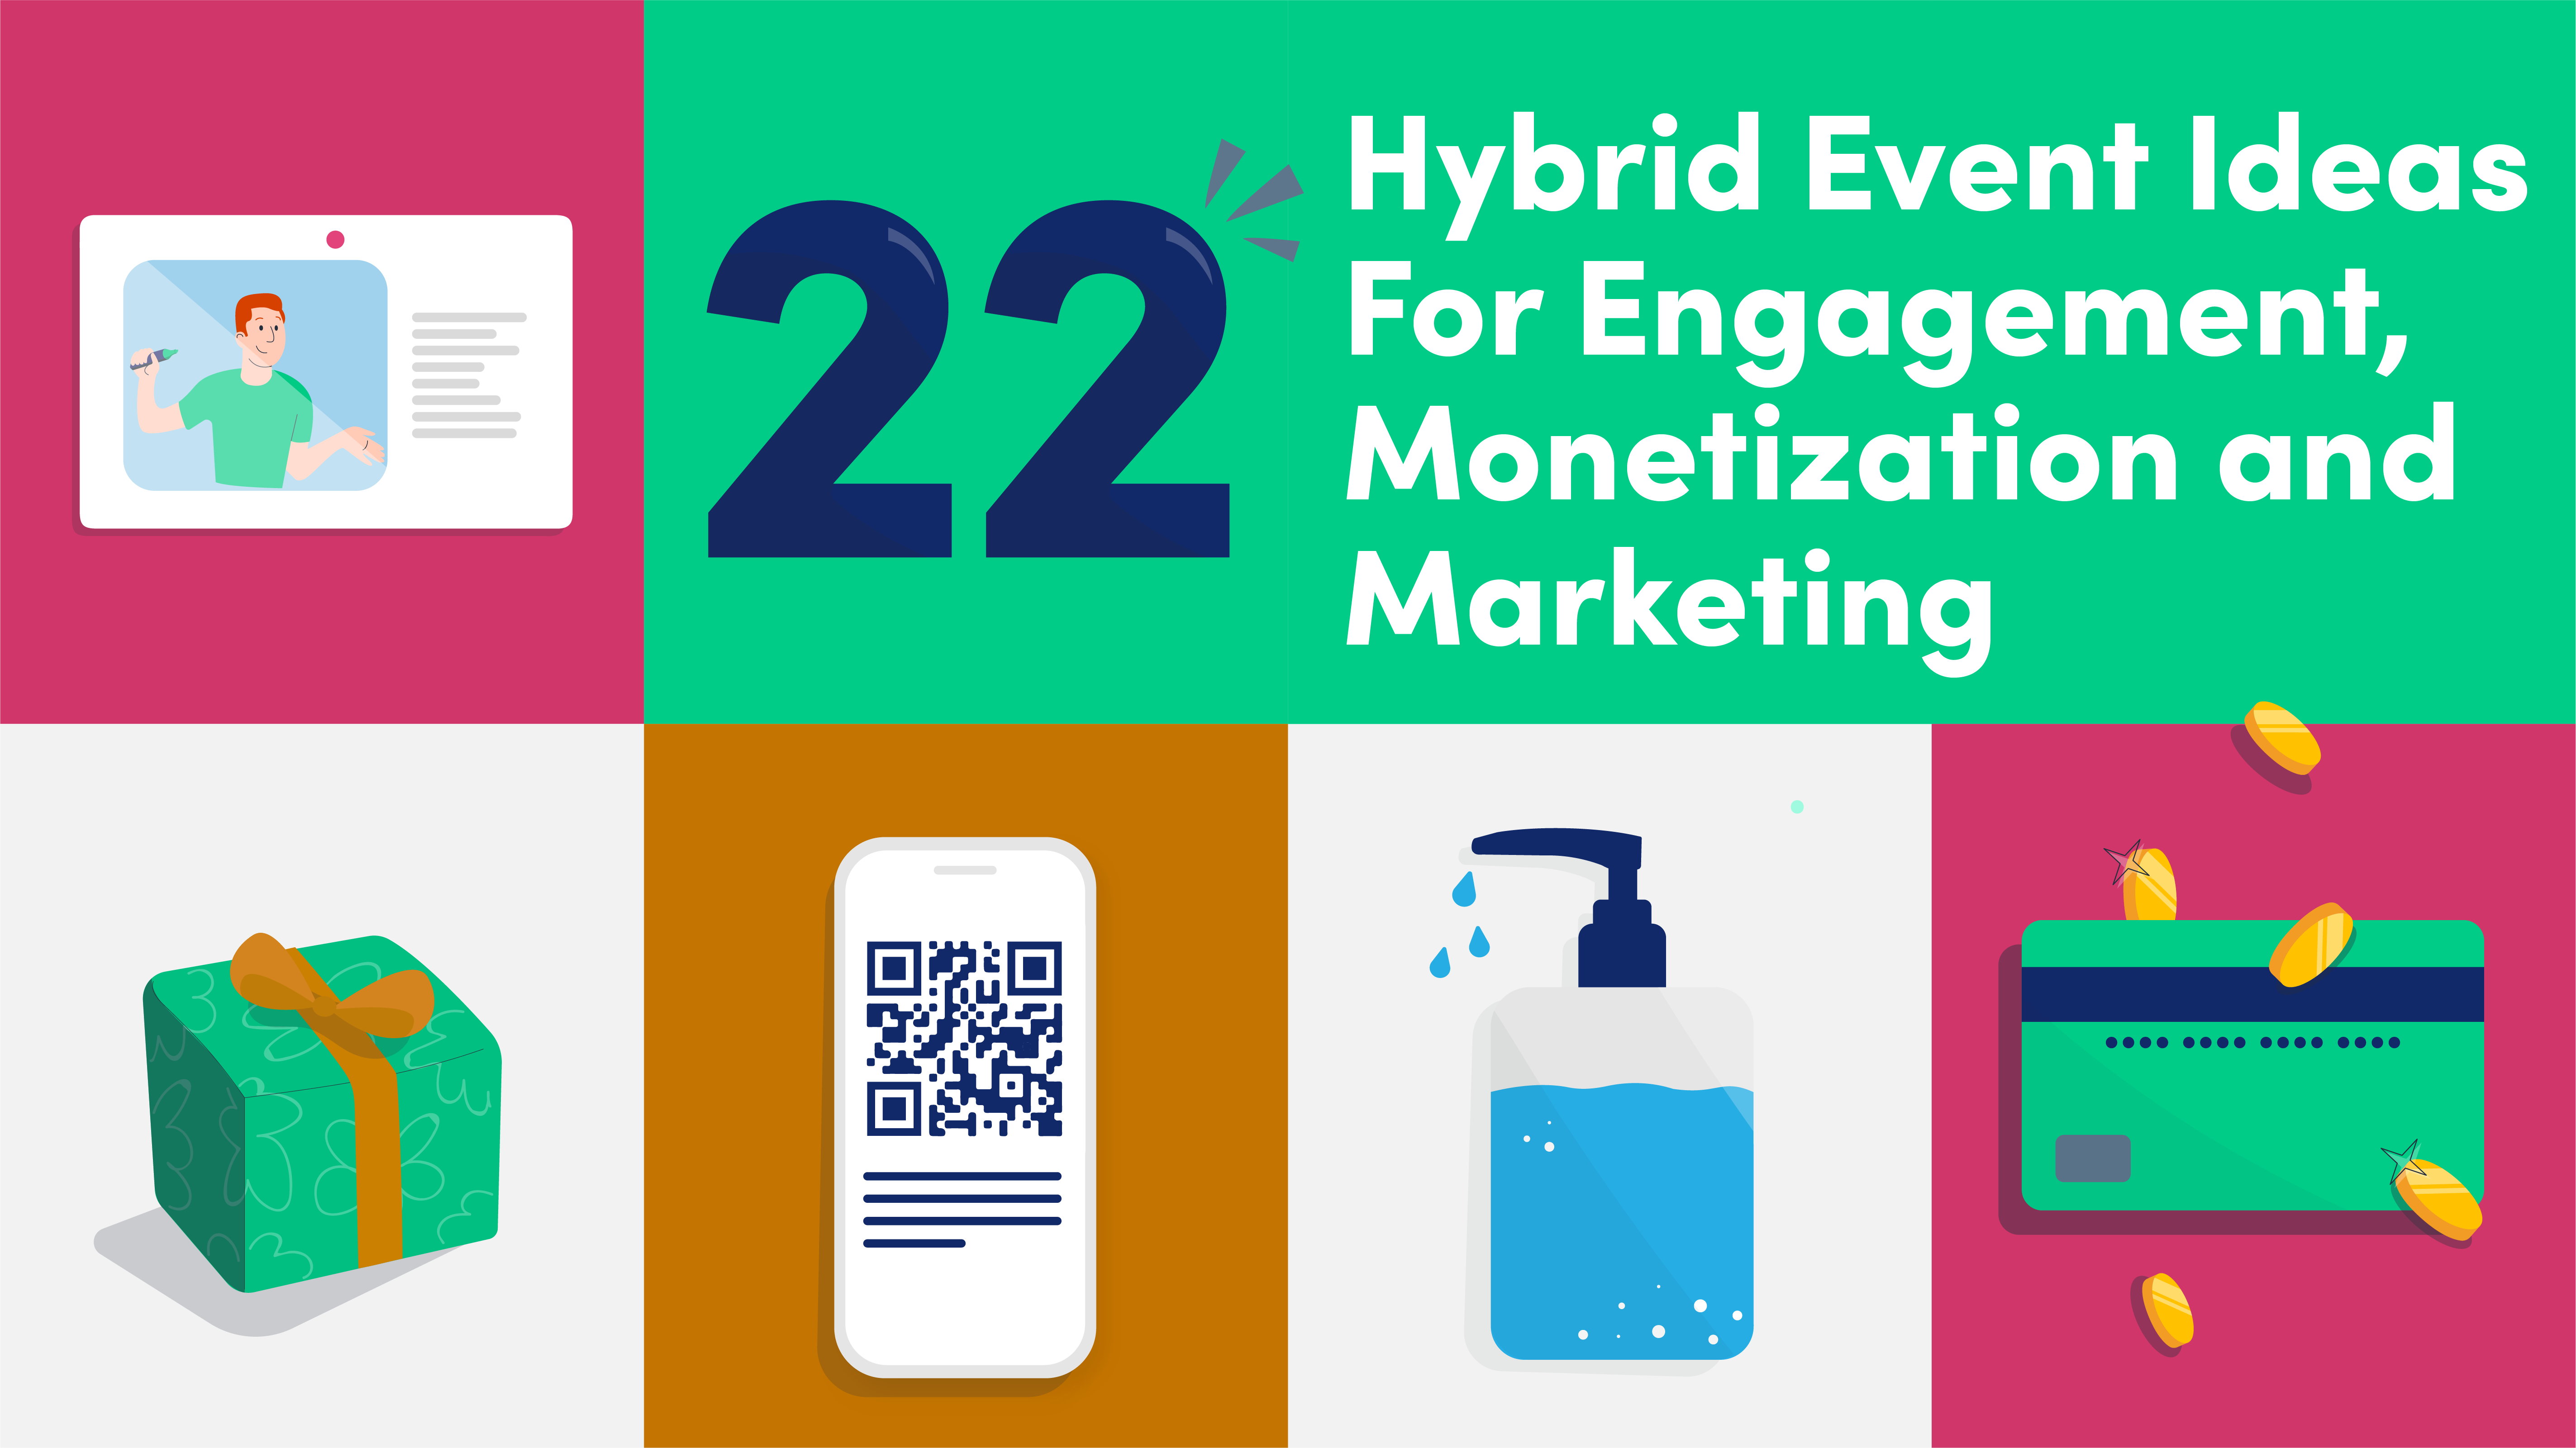 22 Hybrid Event Ideas For Engagement, Monetization and Marketing